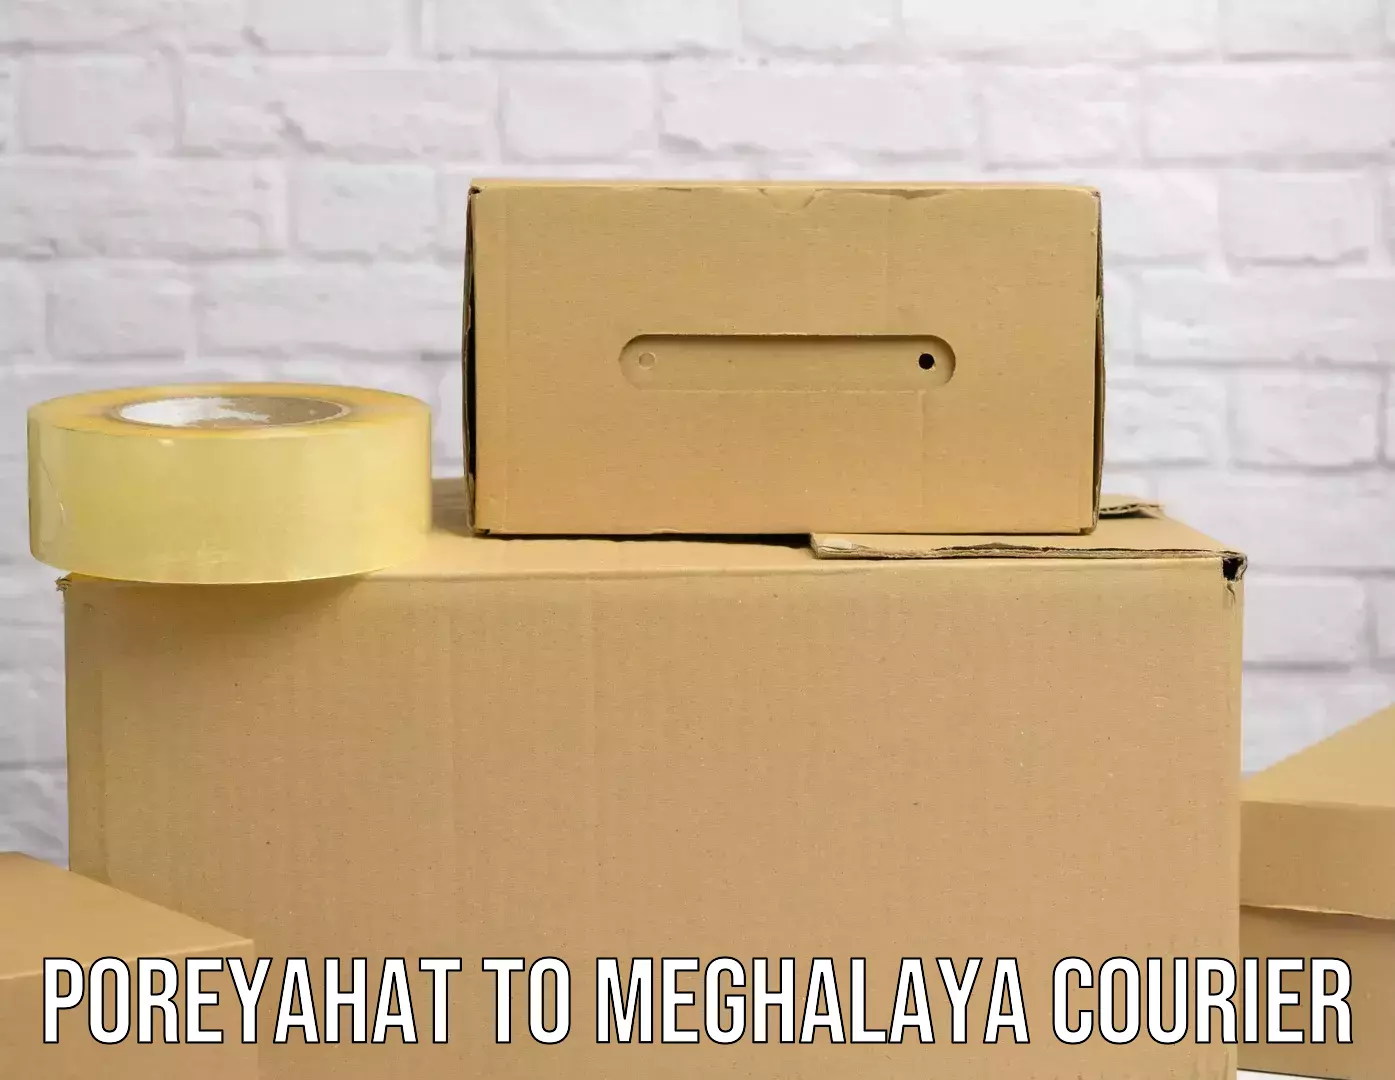 Advanced package delivery Poreyahat to Meghalaya